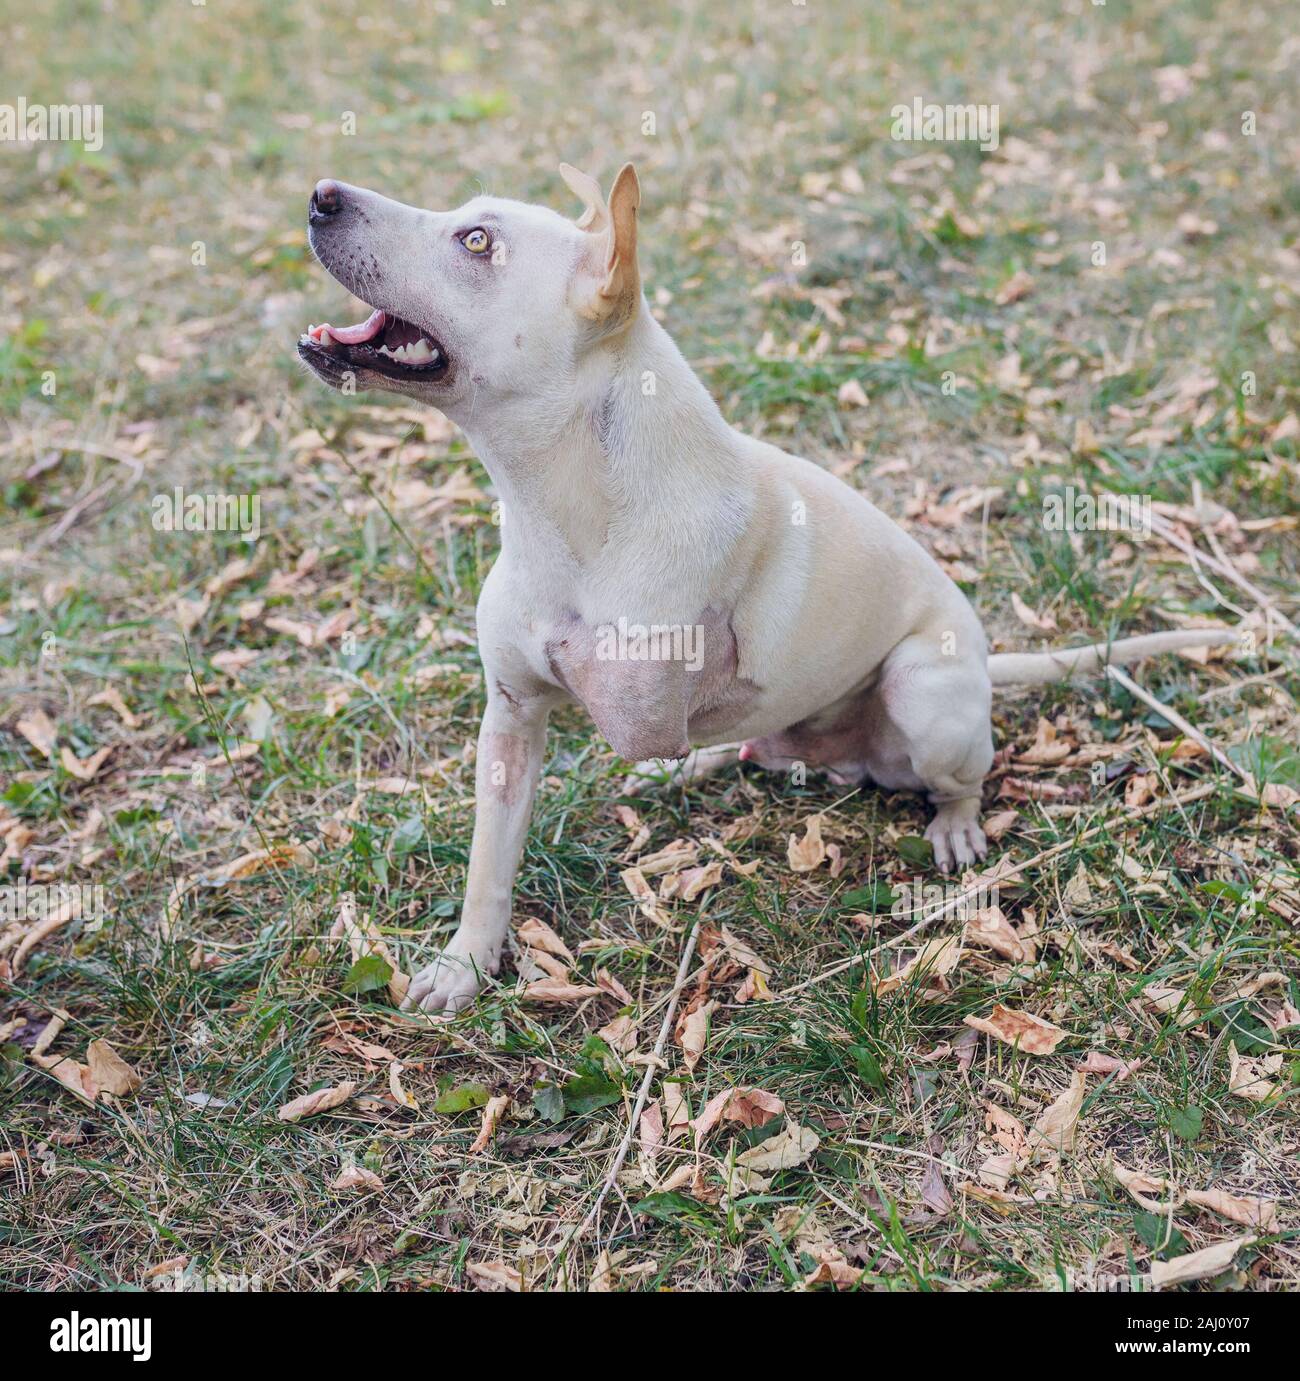 The pit bull dog is invalid, despite everything cheerful Stock Photo